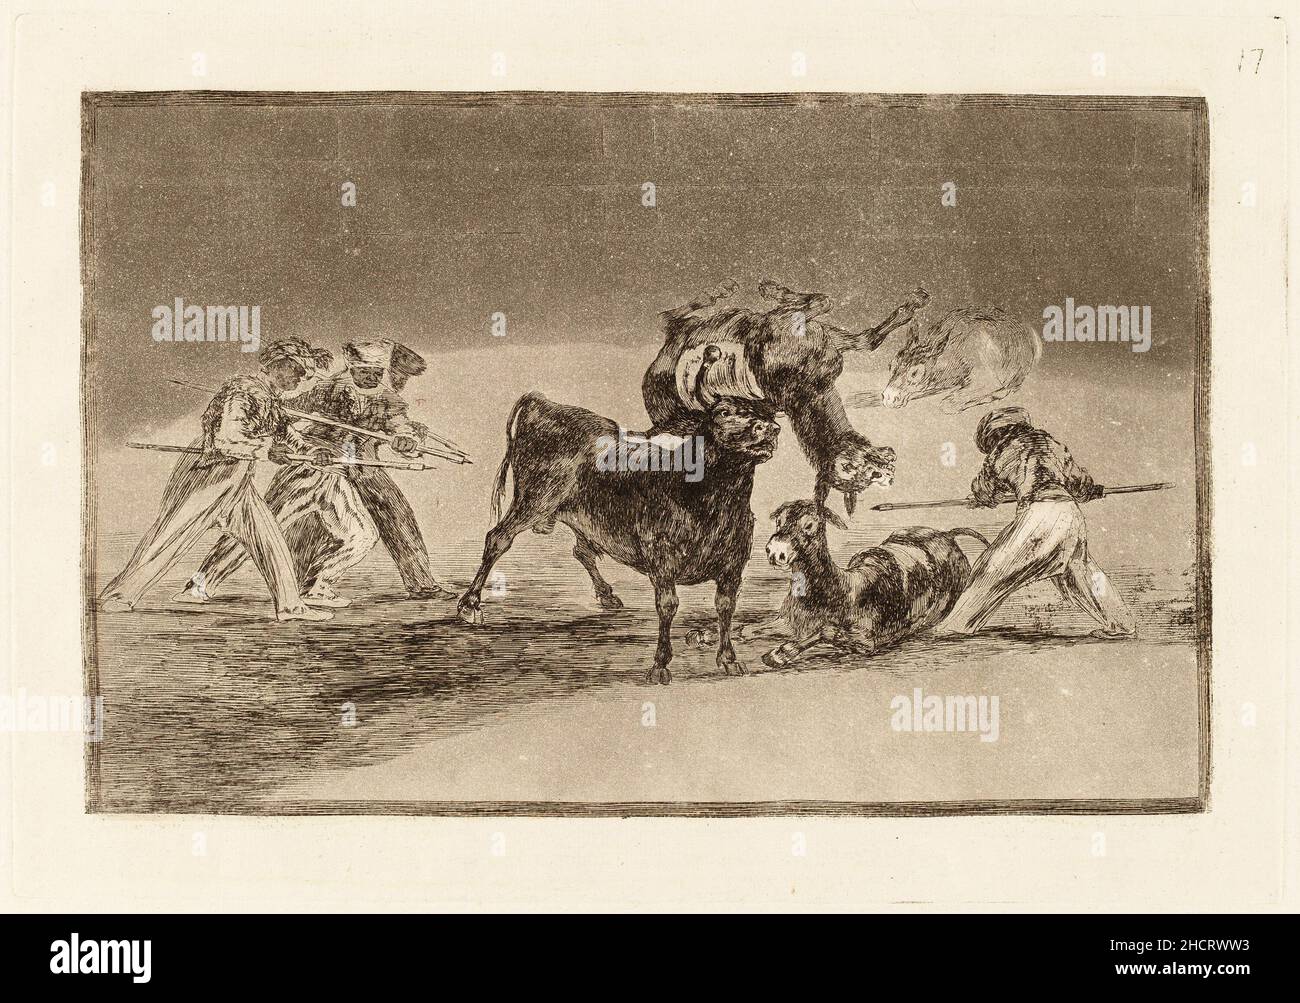 Francisco de Goya, Palenque de los moros hecho con burros para defenderse del toro embolado (The Moors Use Donkeys as a Barrier to Defend Themselves against the Bull Whose Horns have been Tipped with Balls). This is print number 17 in a 33 print series on bullfighting. Stock Photo